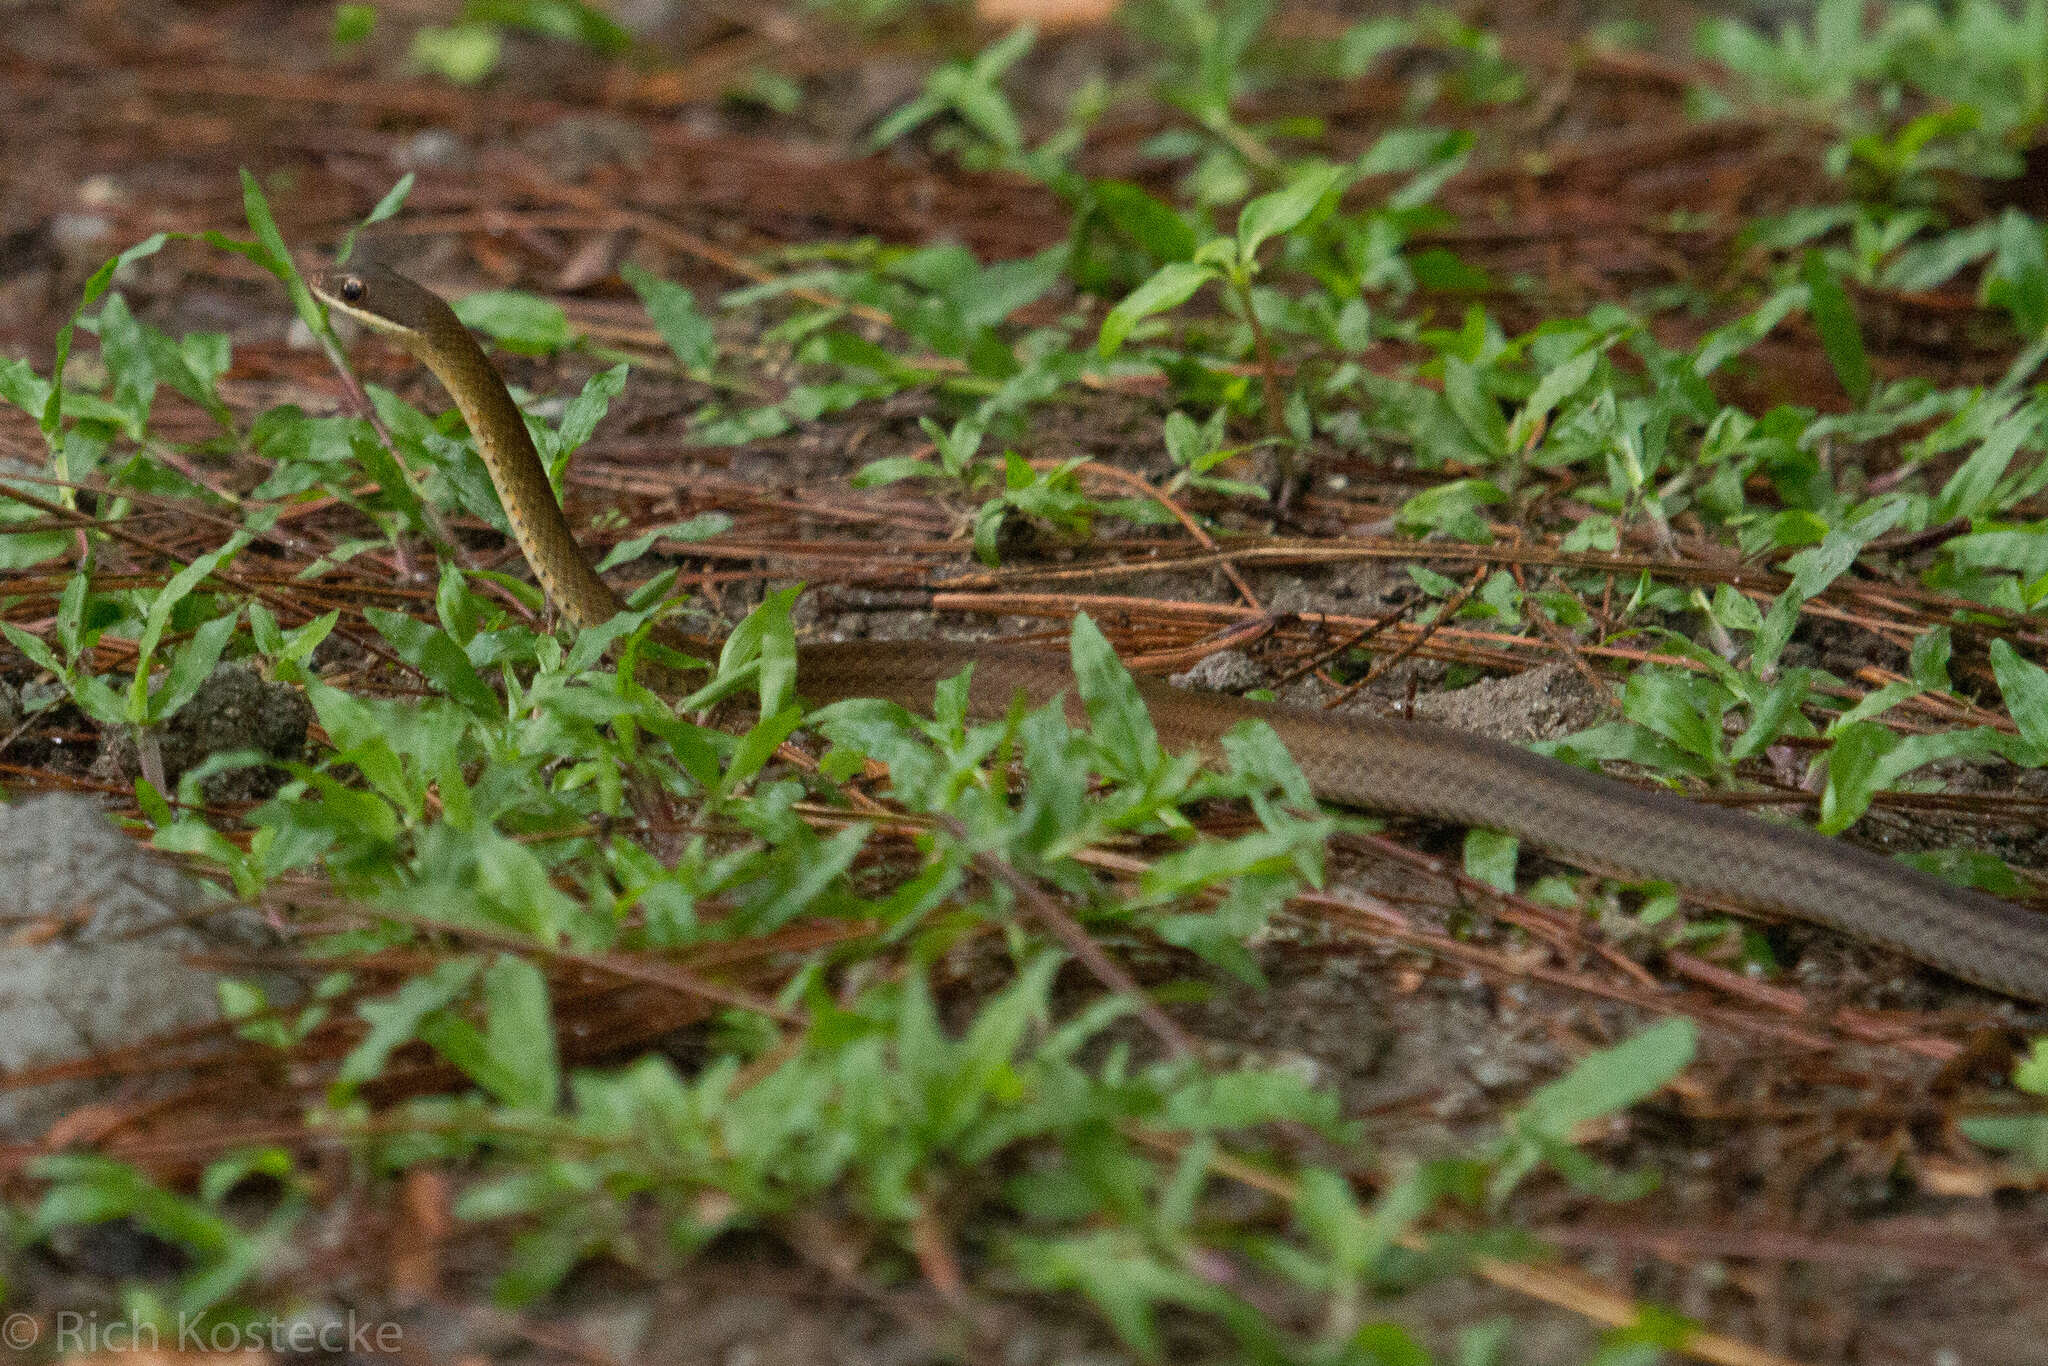 Image of South American Forest Racer